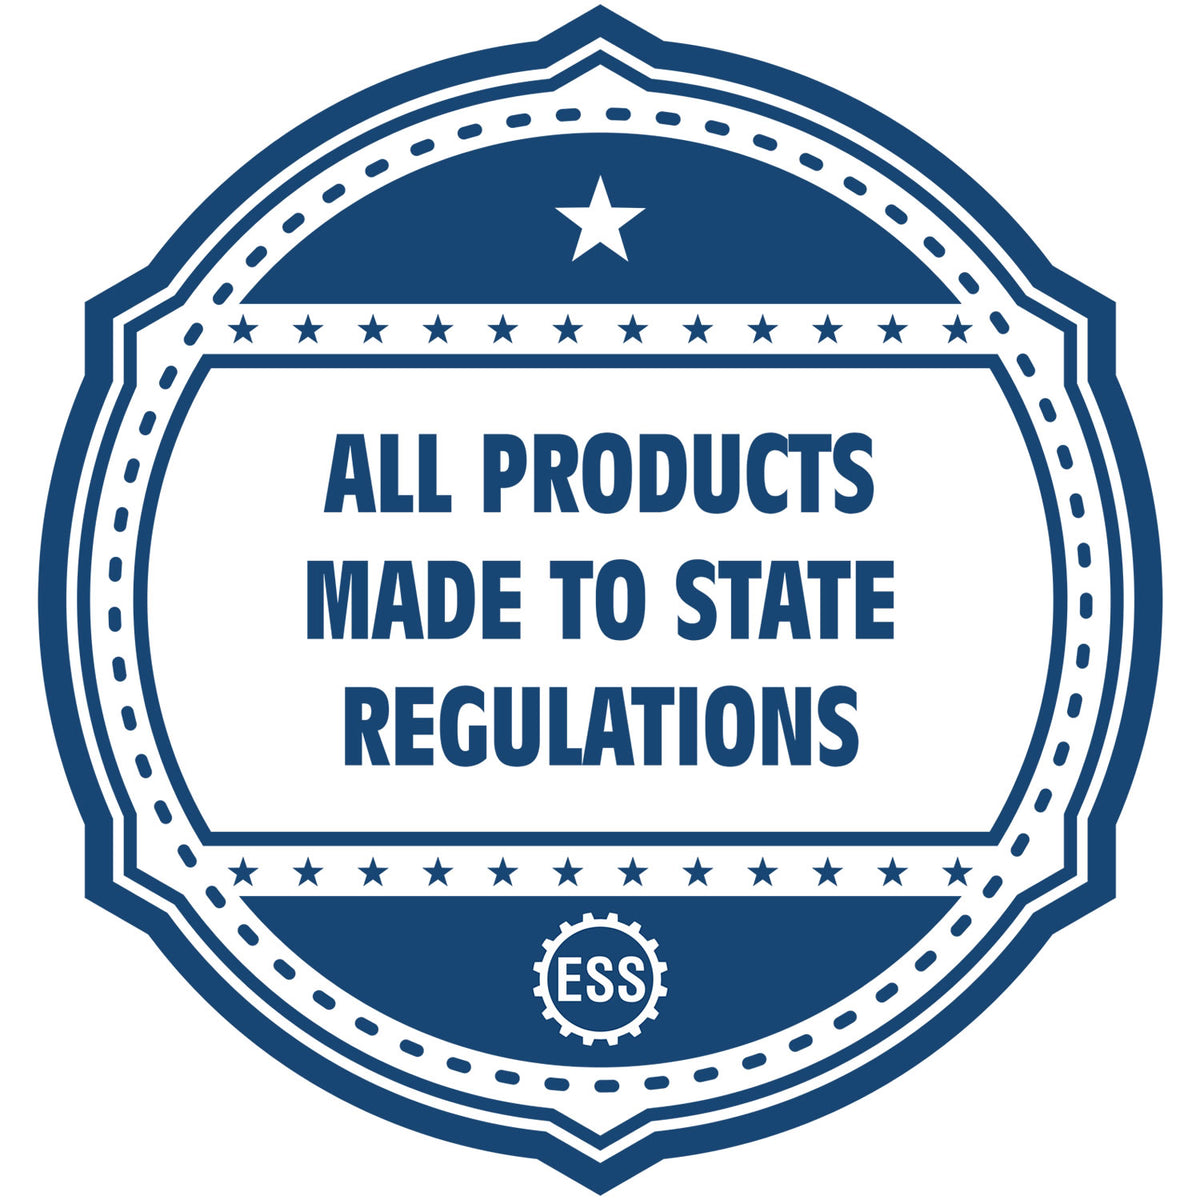 An icon or badge element for the Super Slim Mississippi Notary Public Stamp showing that this product is made in compliance with state regulations.